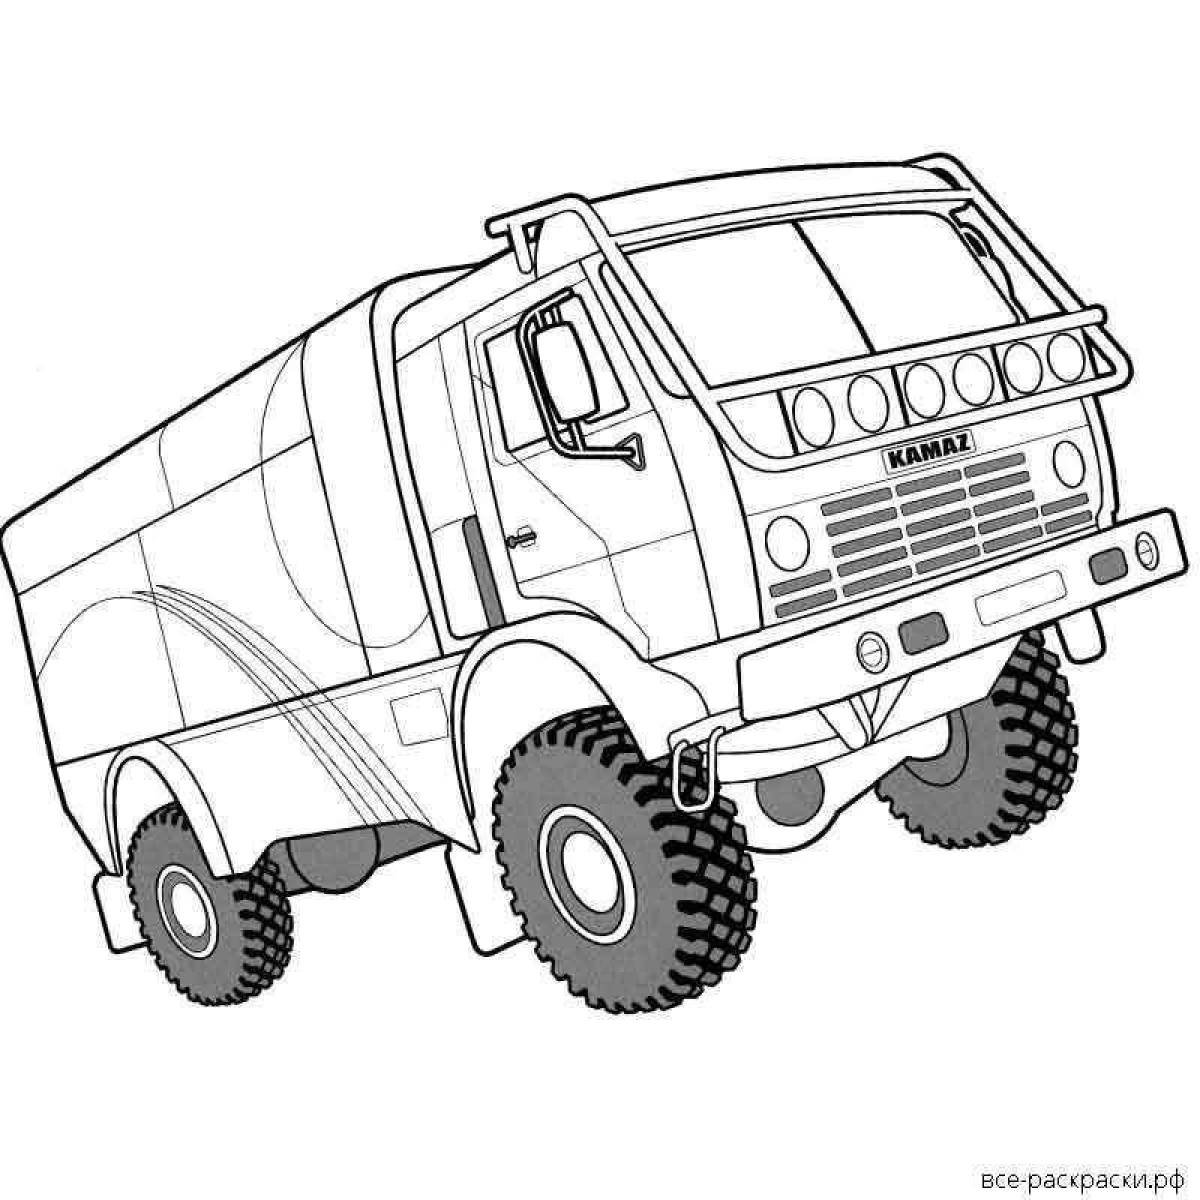 KAMAZ funny coloring book for boys